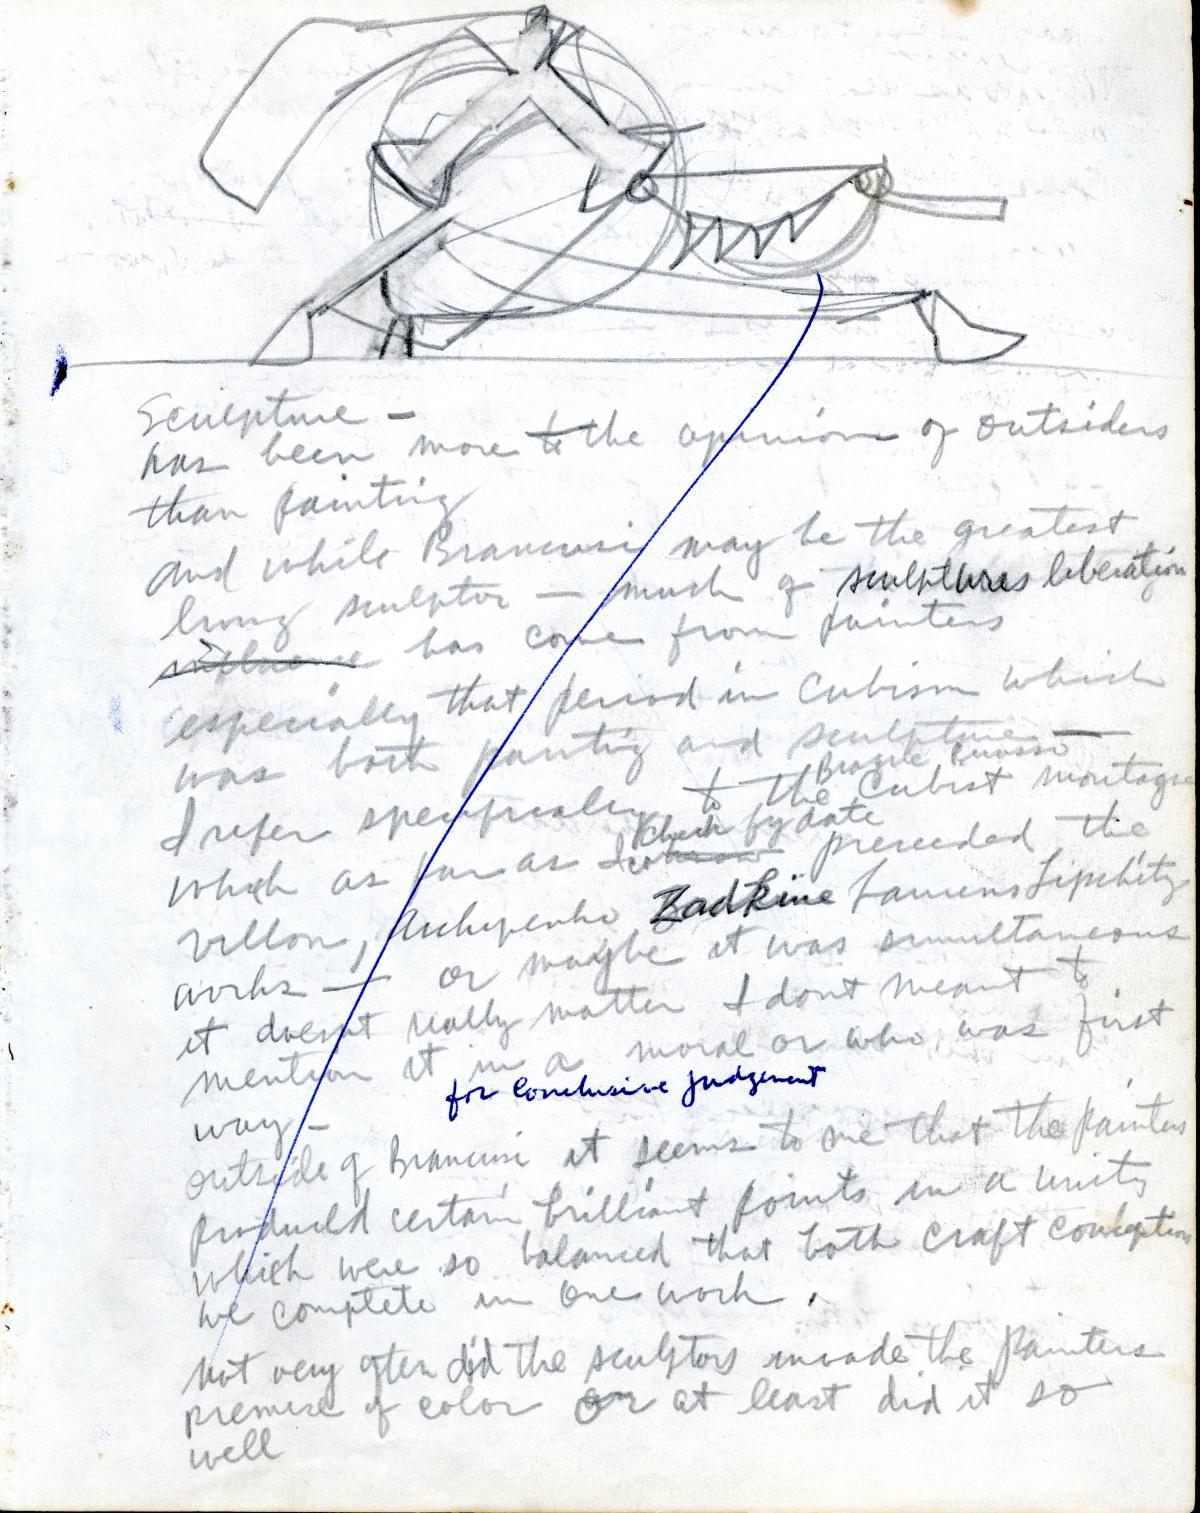 David Smith Notebook, page 51